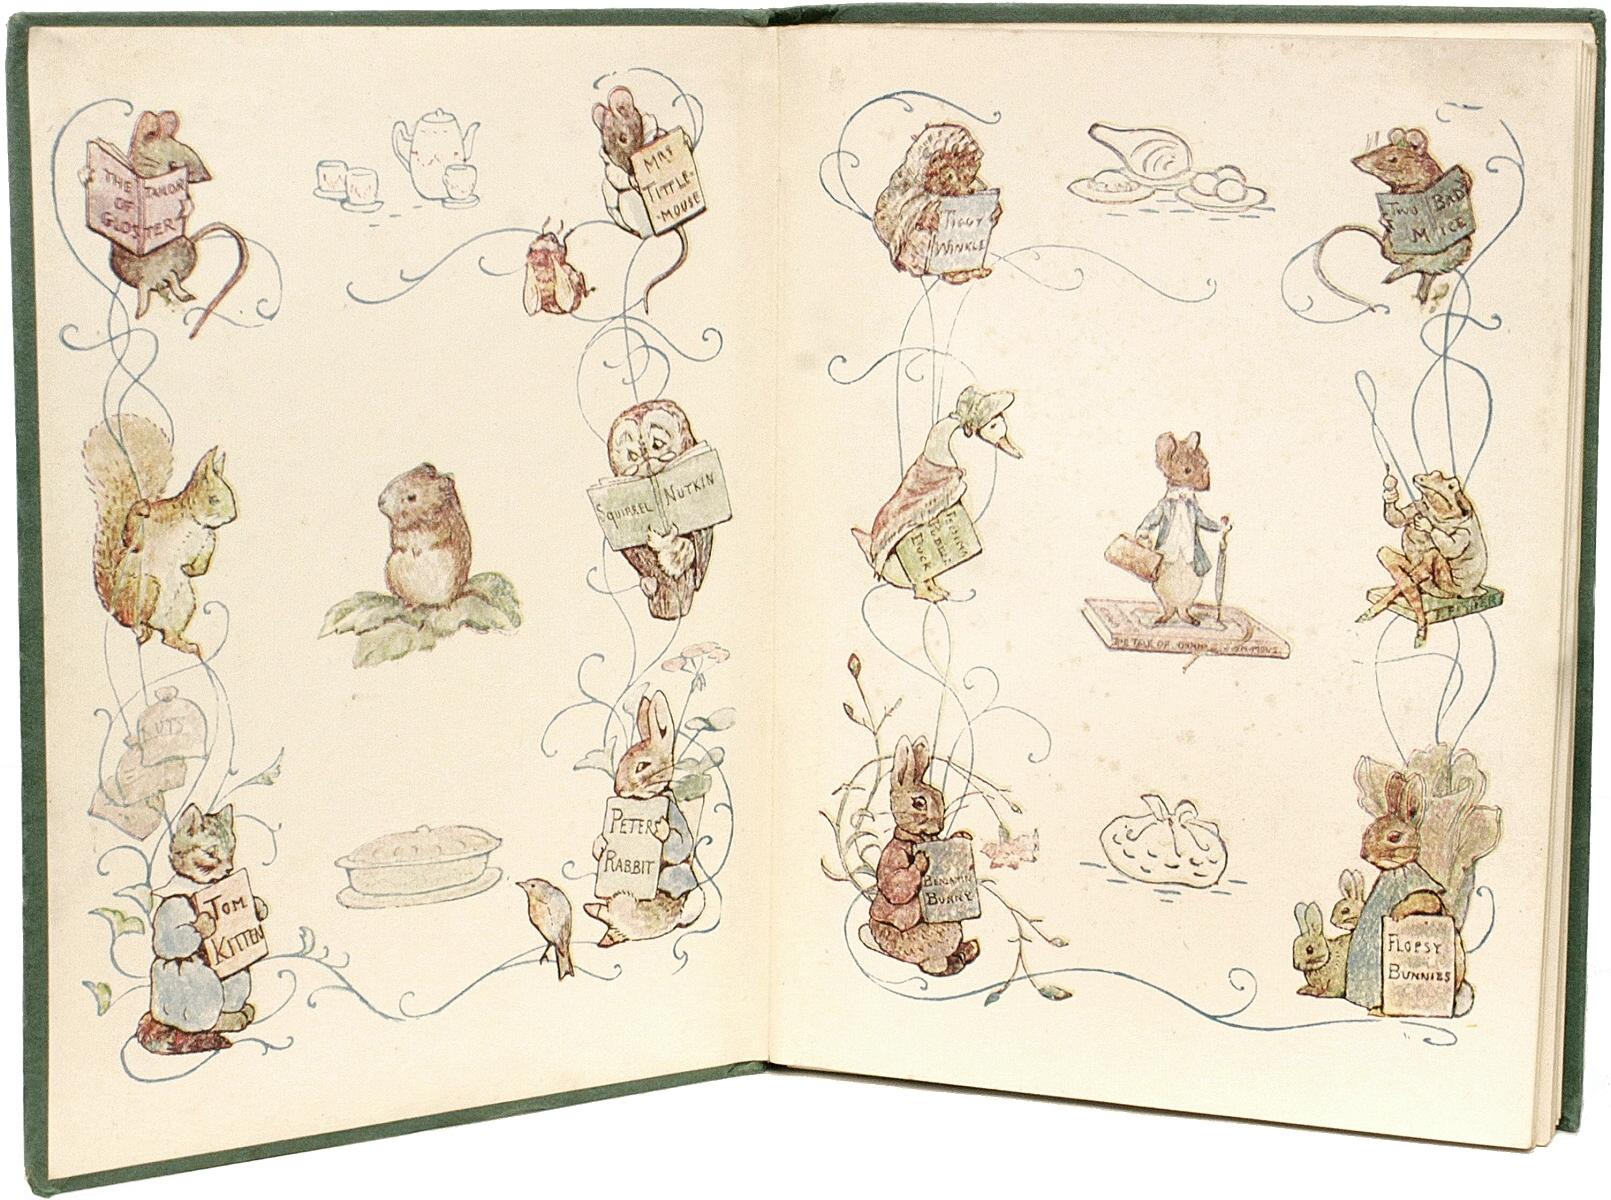 Beatrix Potter, Tale of Jemima Puddle-Duck, Presentation Copy, with a Drawing 1